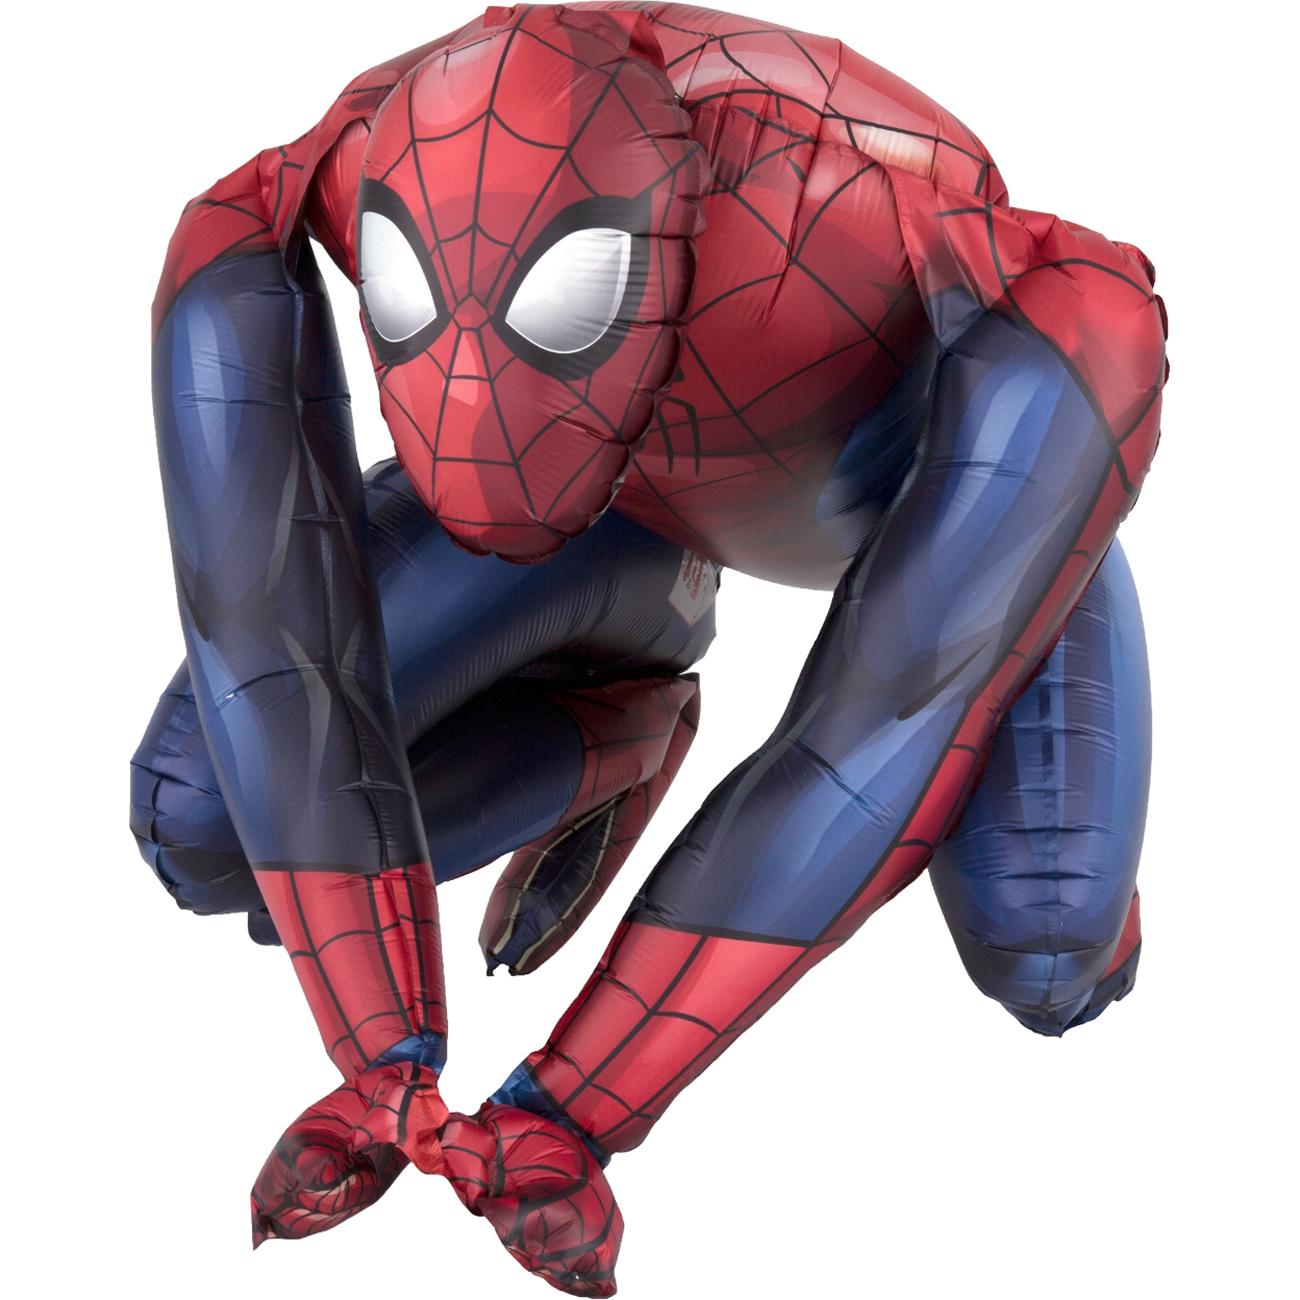 Spider-Man Sitting Foil Balloon 38cm Balloons & Streamers - Party Centre